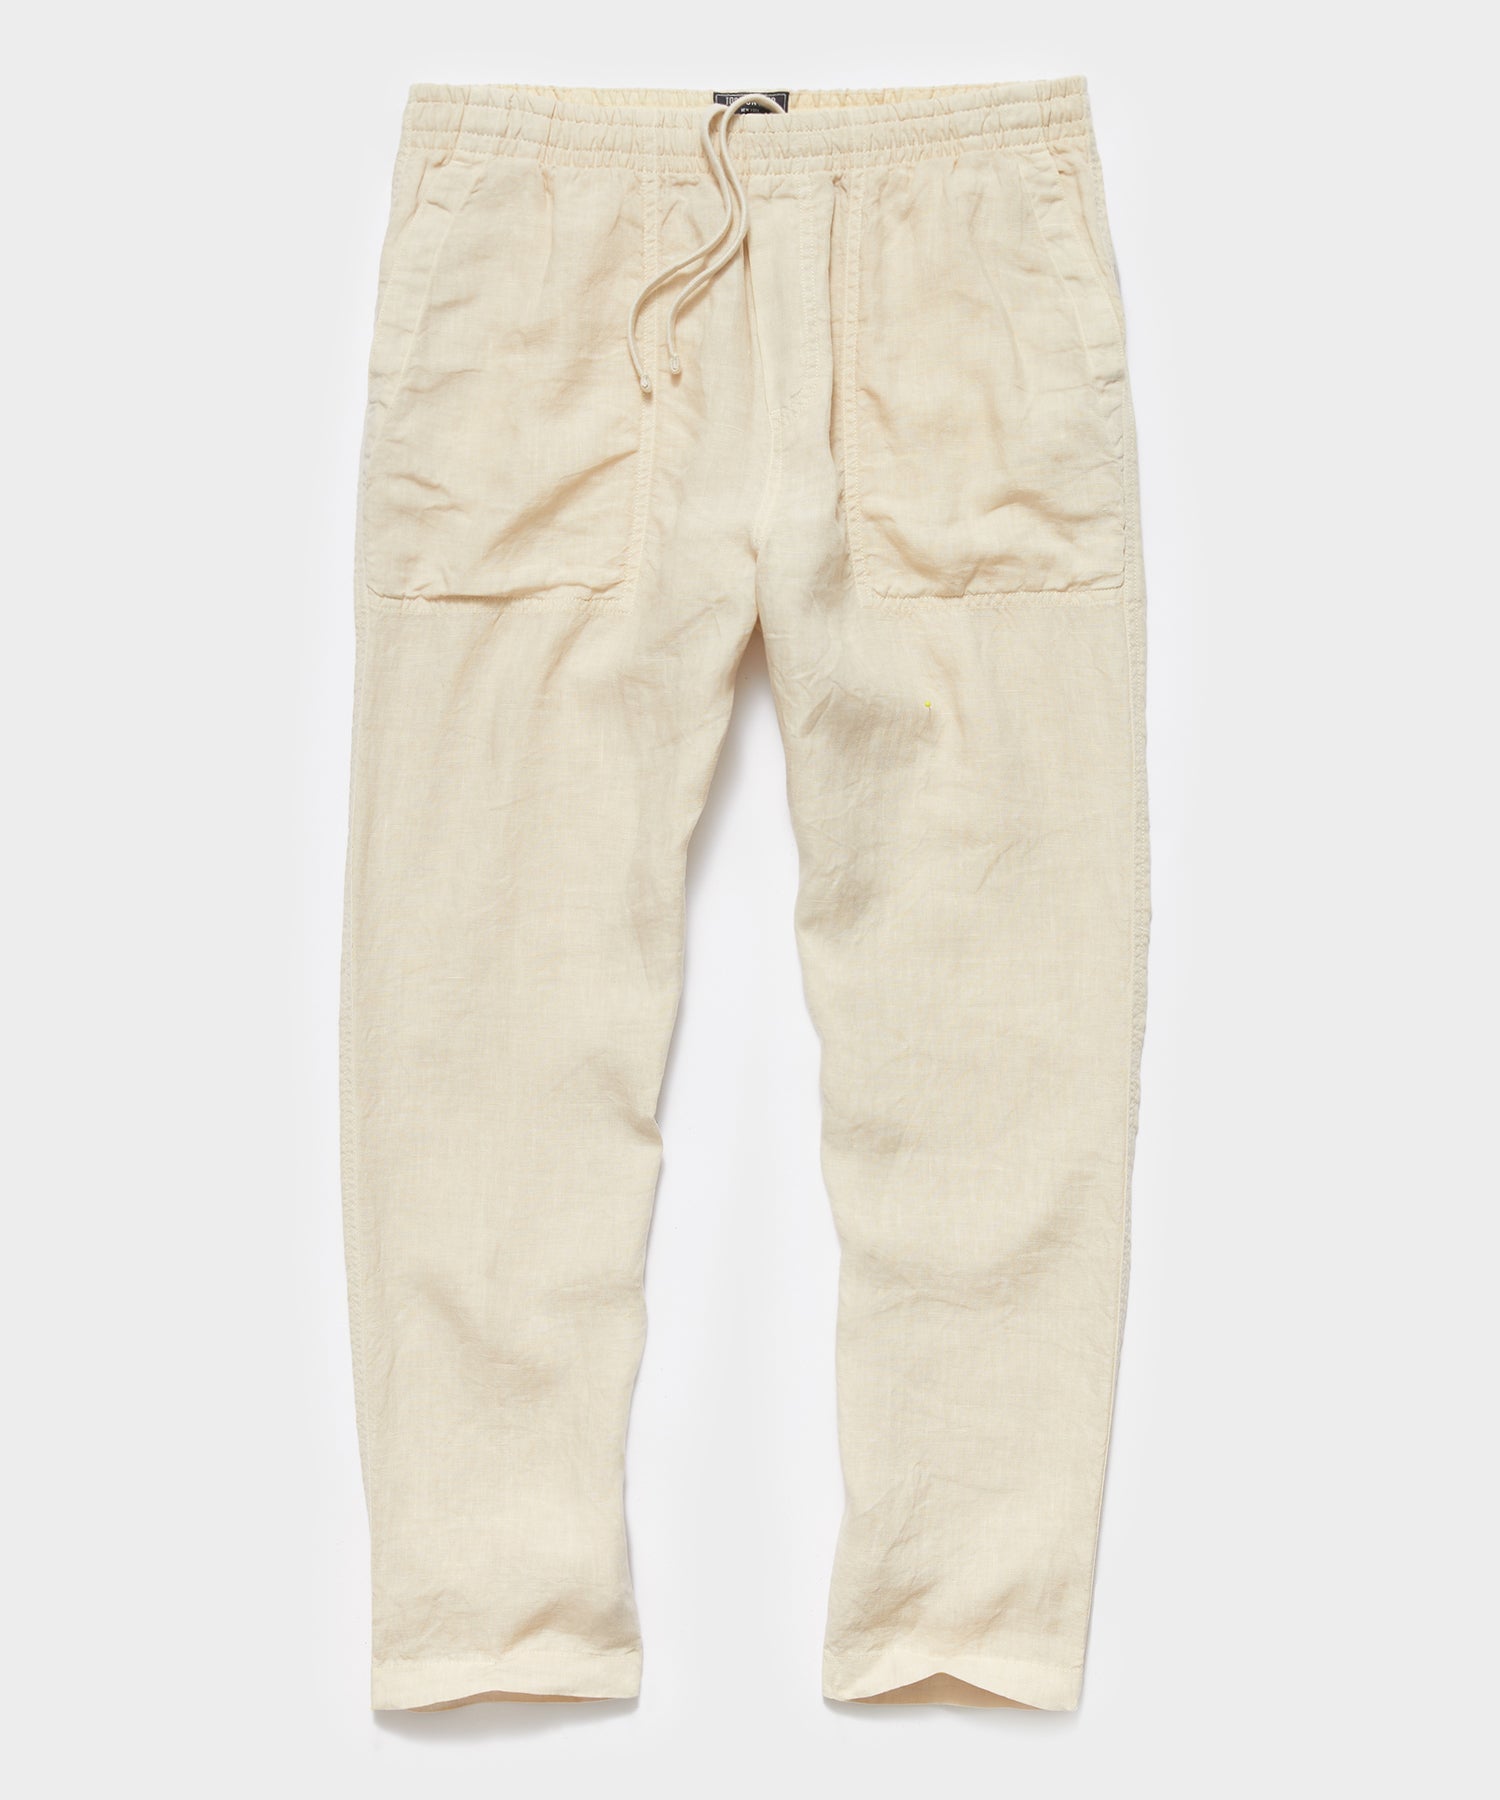 Todd Snyder - TODD SNYDER ITALIAN LINEN BEACH PANT IN SAND DOLLAR - Rent With Thred